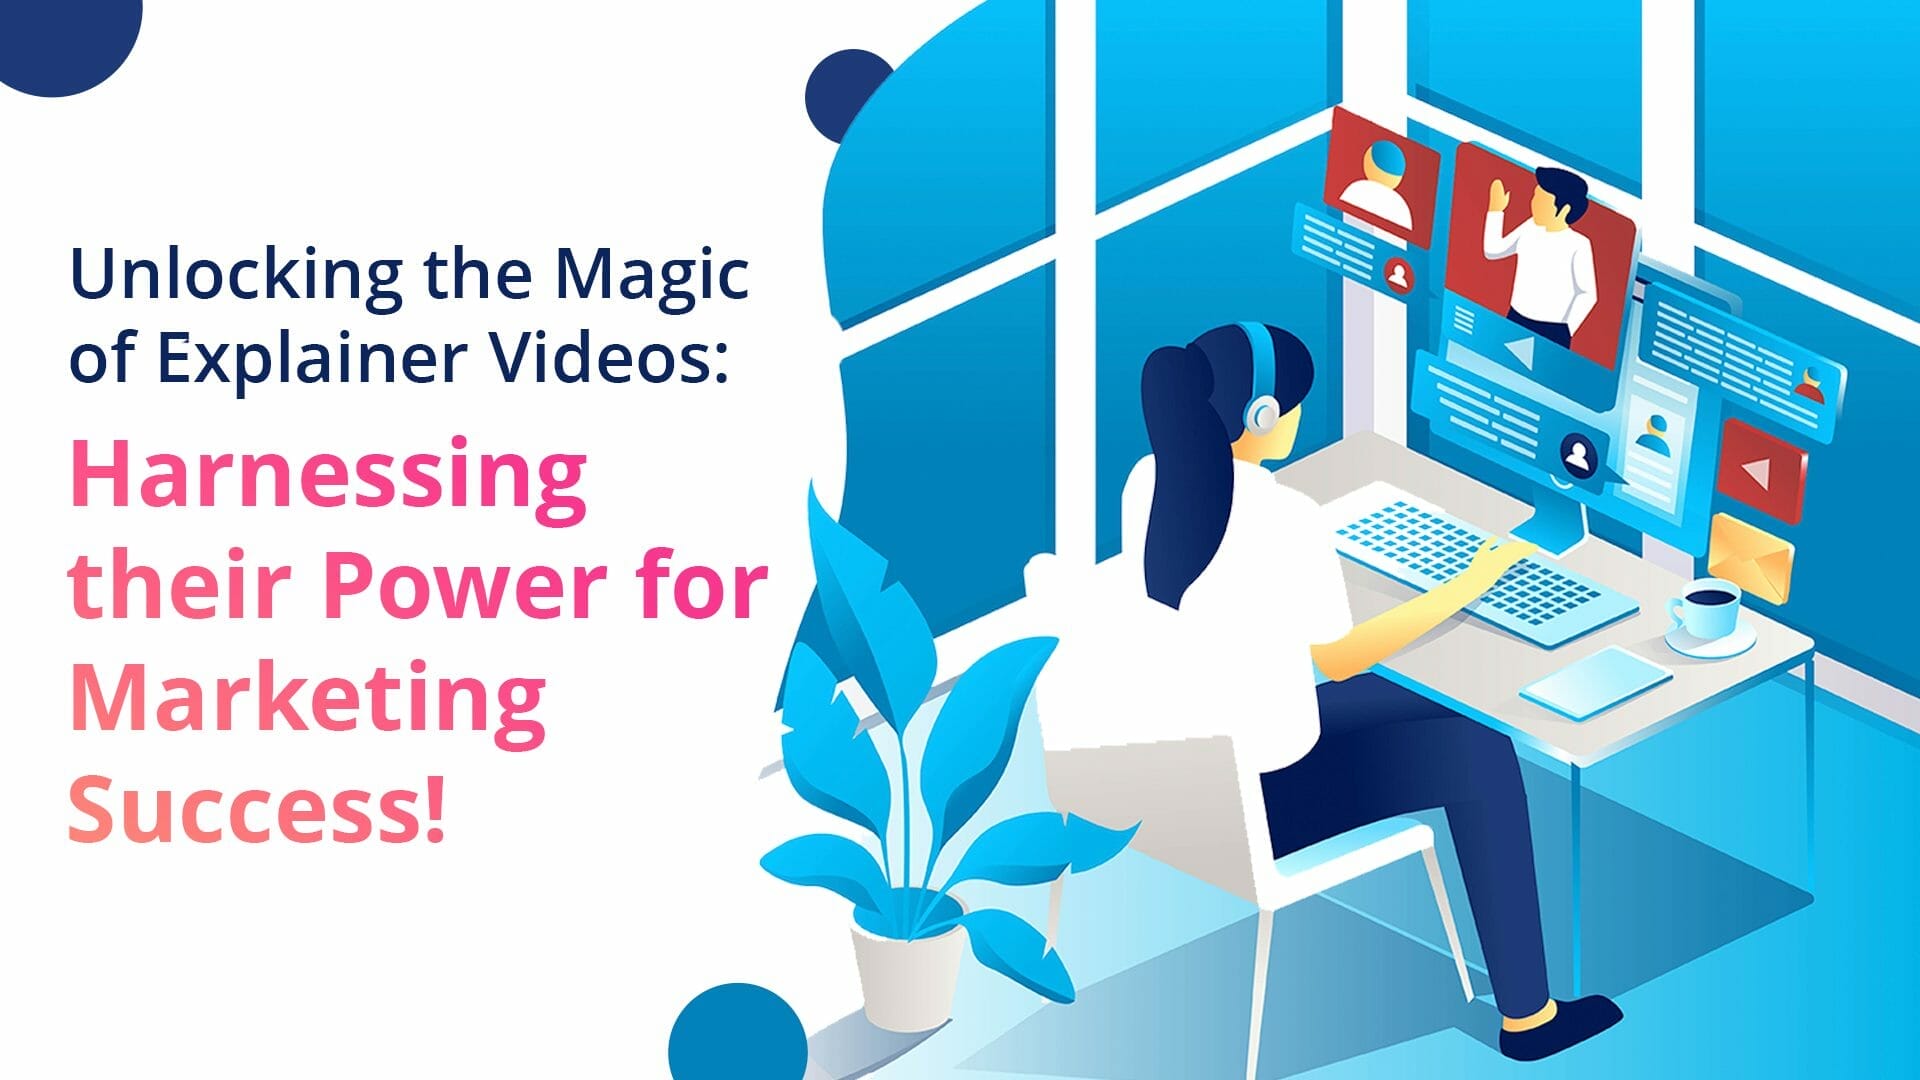 Unlocking the Magic of Explainer Videos: Harnessing their Power for Marketing Success!